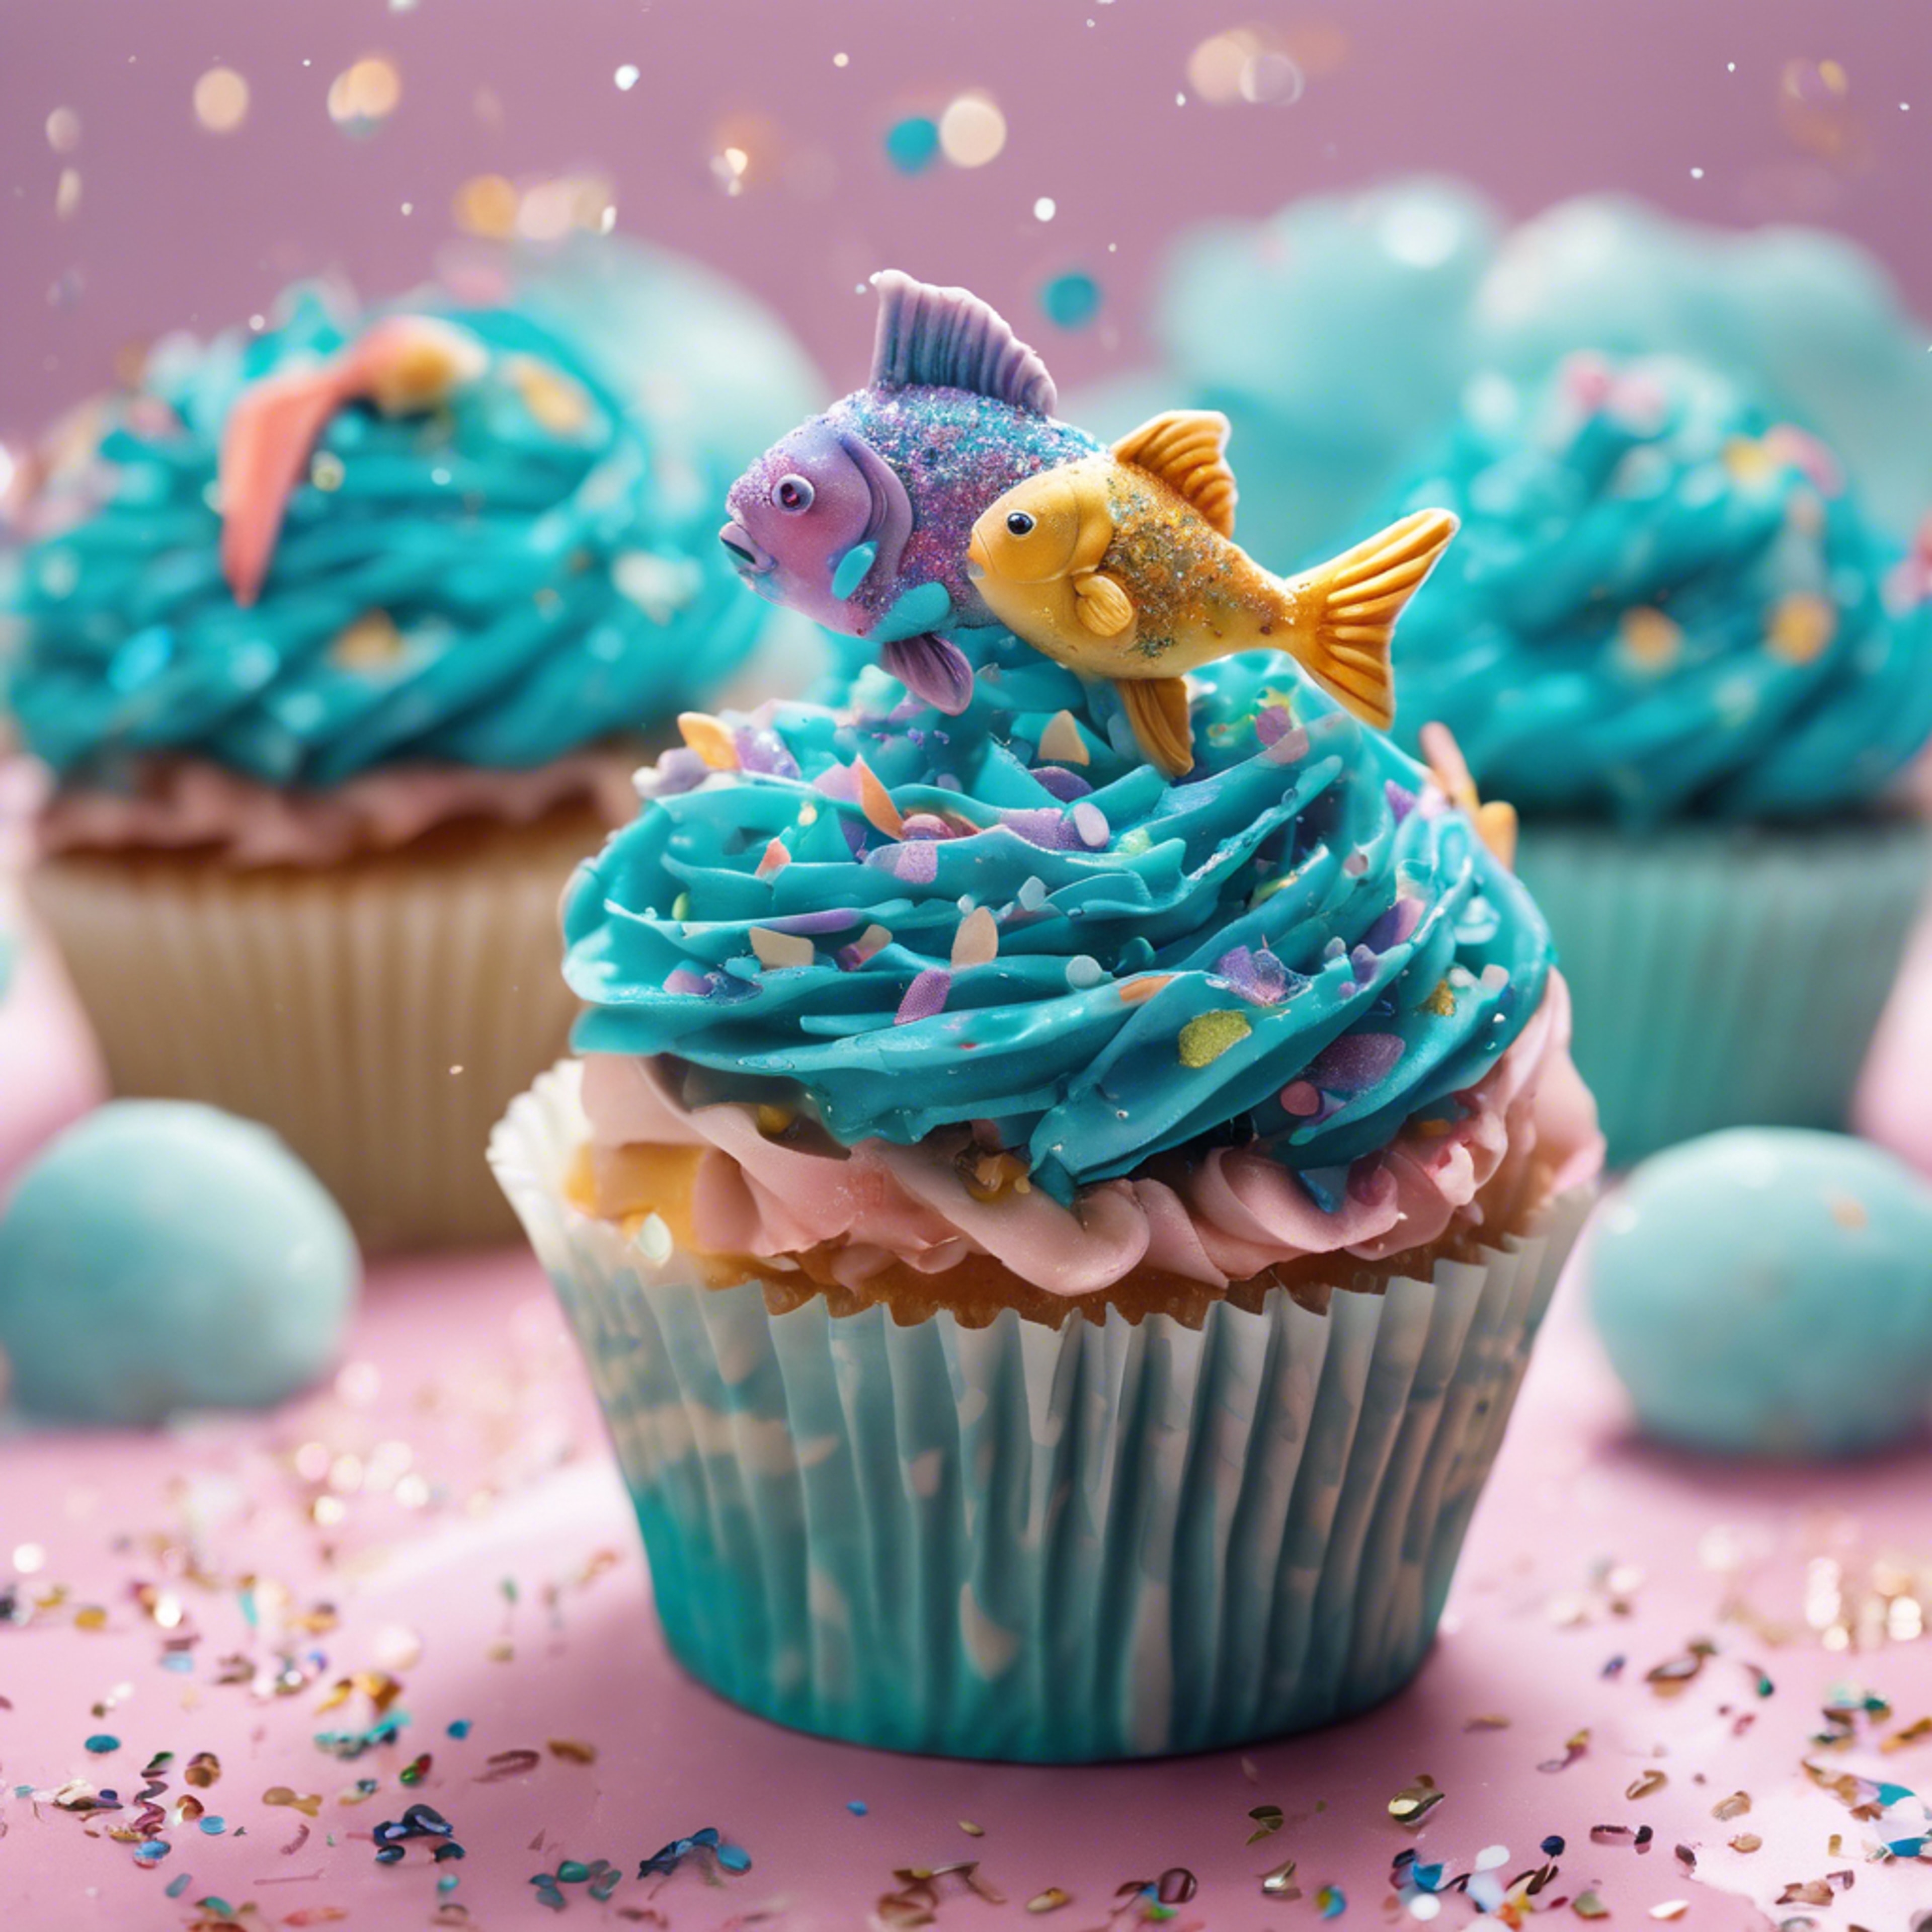 A whimsical Pisces-themed cupcake, with decorative icing representing two cute fish swimming in a sea of sprinkles. Hintergrund[694d5145c111483cb550]